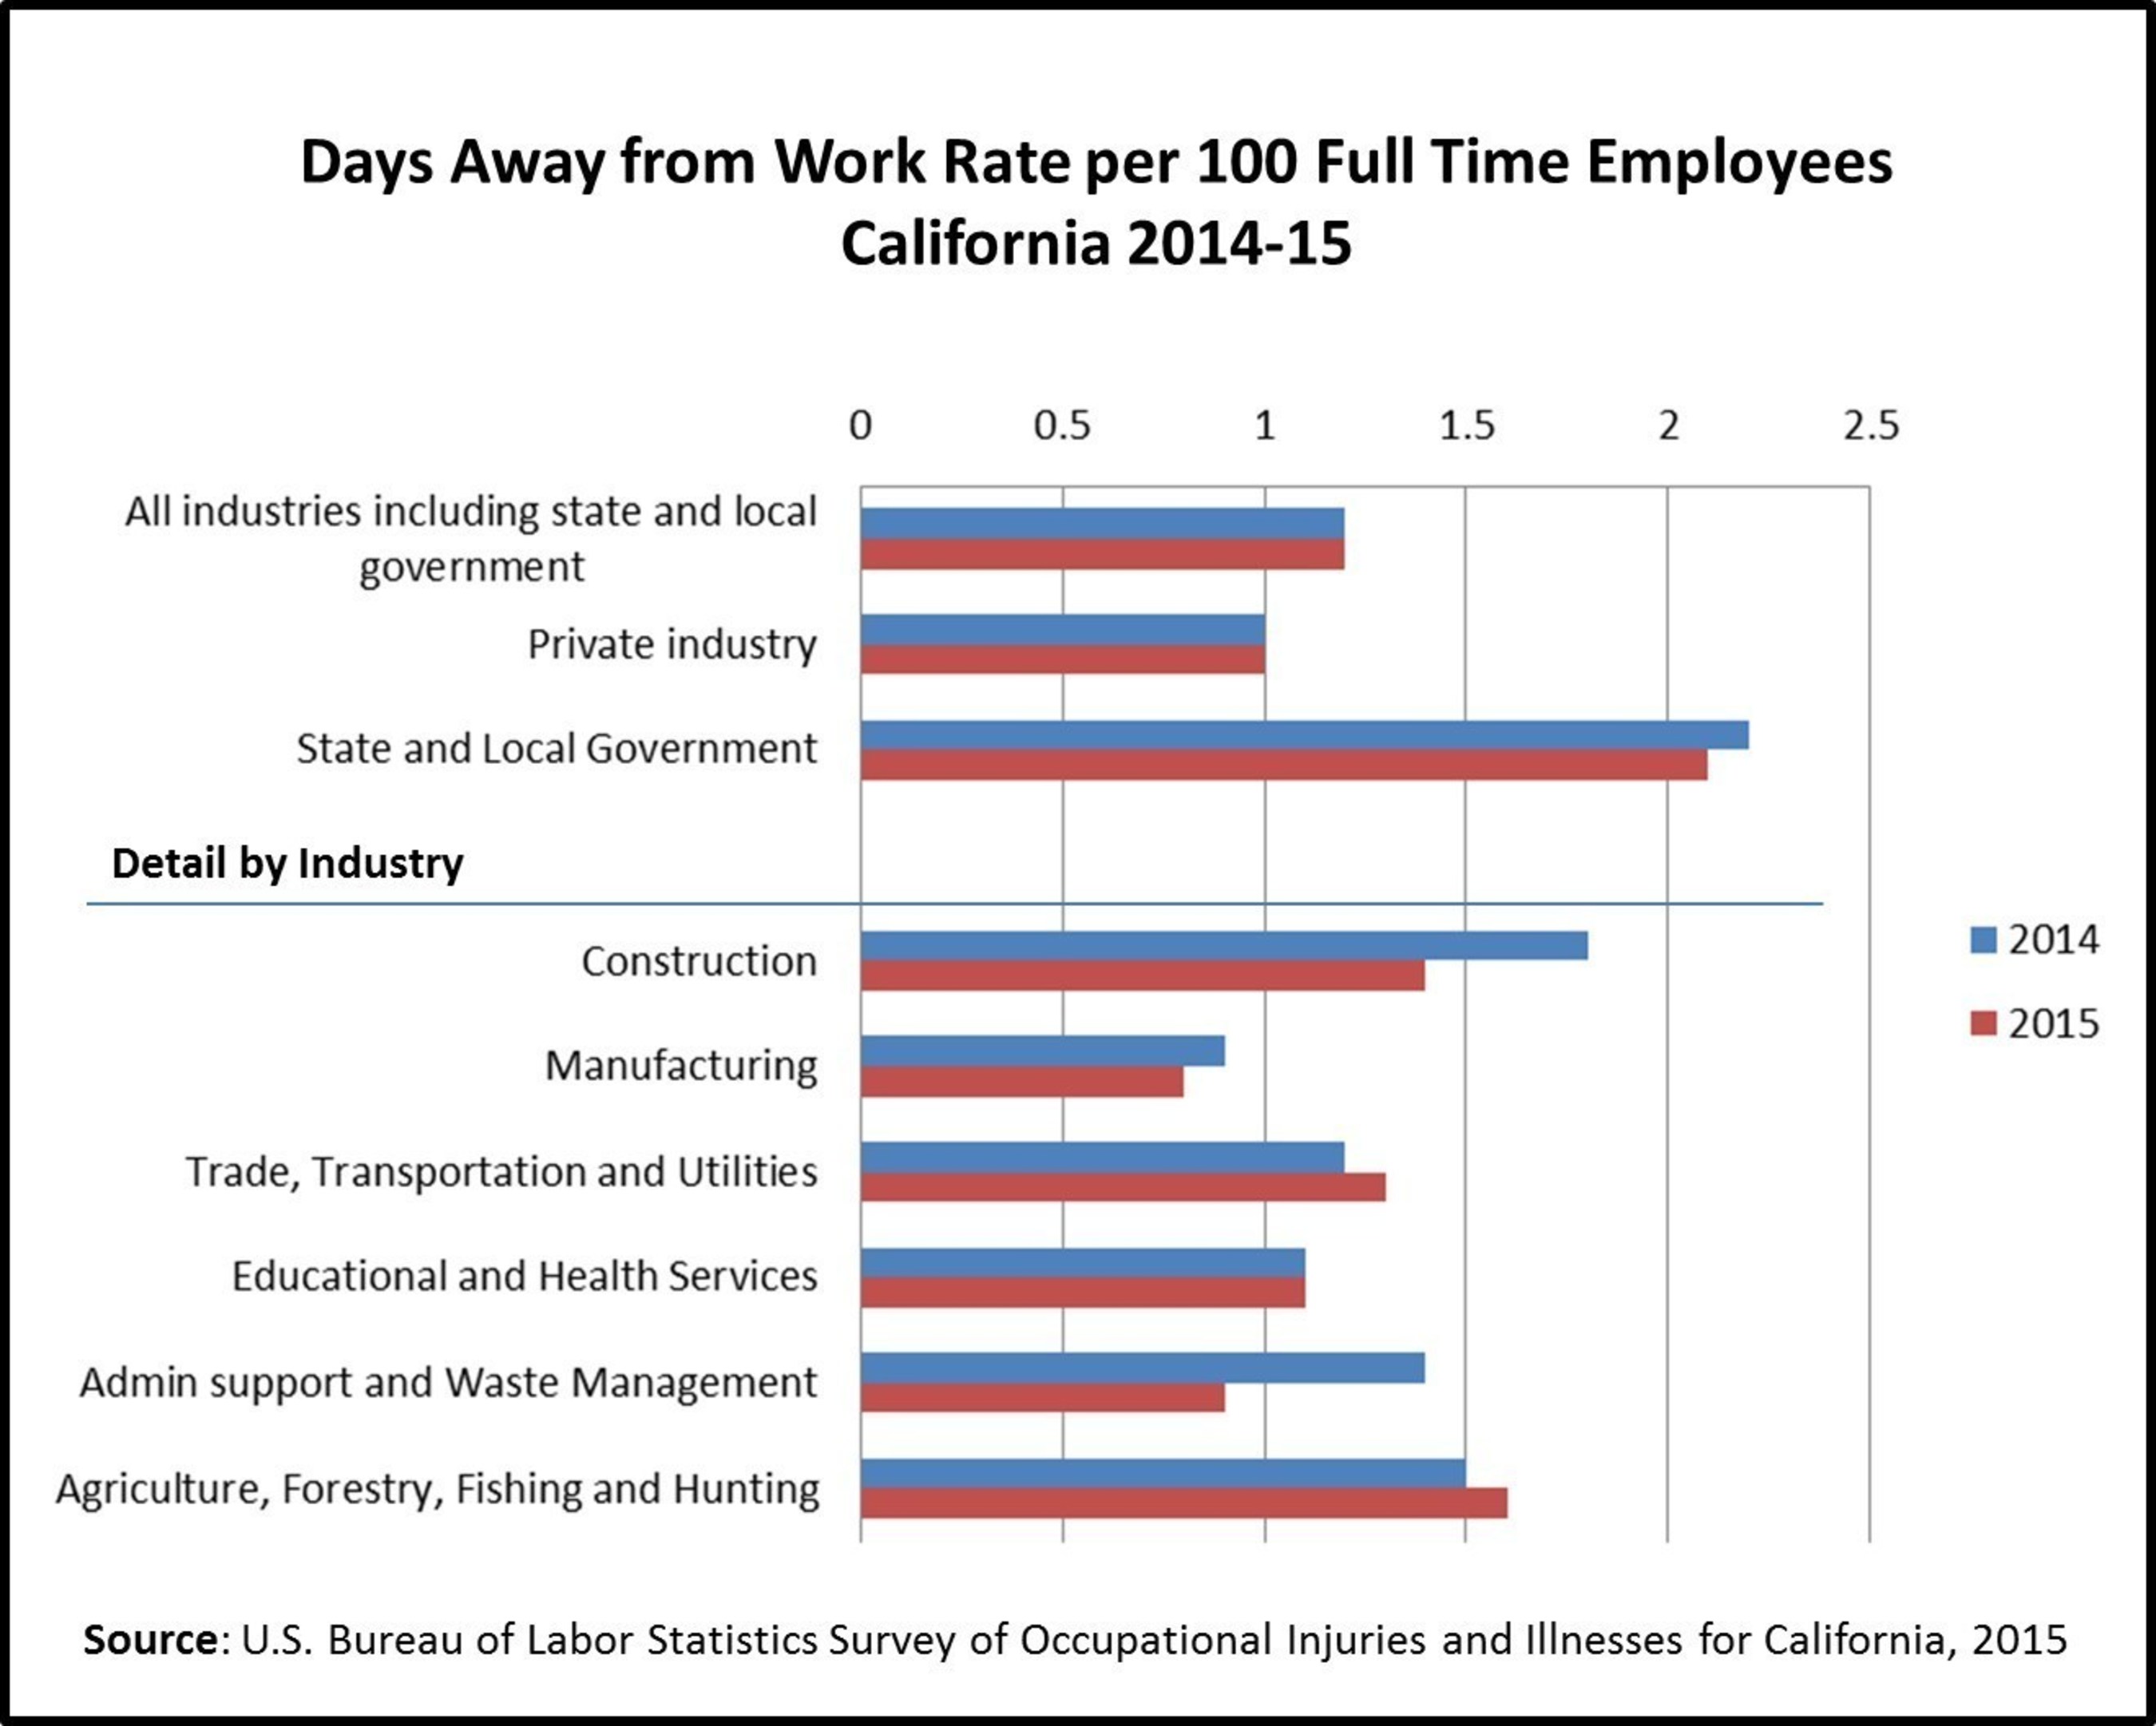 Days Away from Work Rate per 100 Full Time Employees in California, 2014-2015